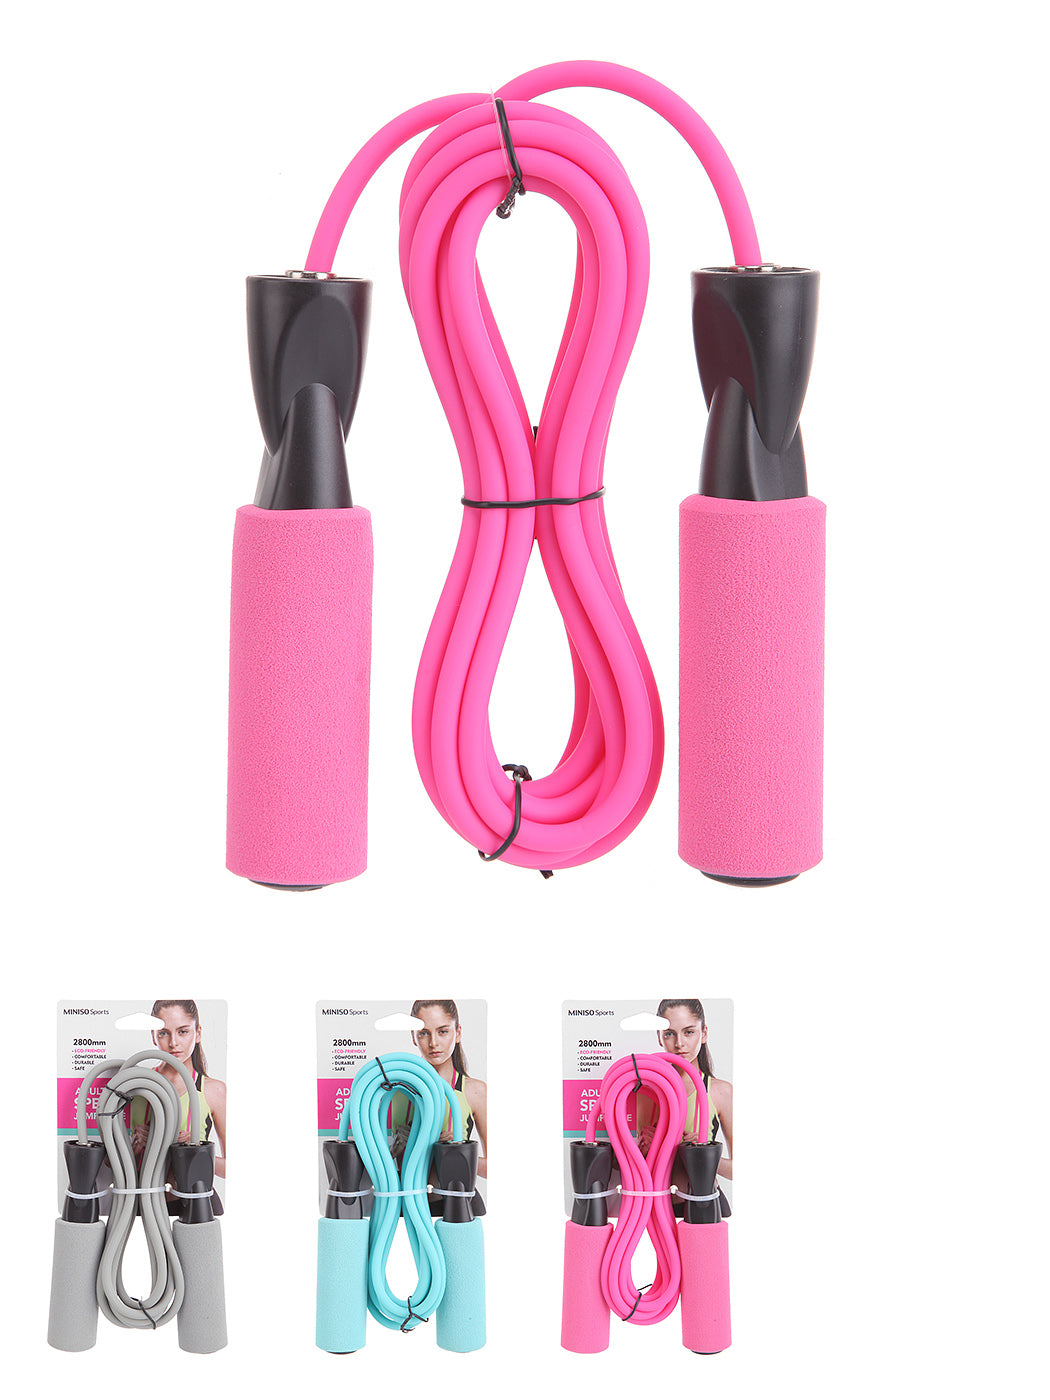 MINISO MINISO SPORTS - ADULT'S SPEED JUMP ROPE (2800MM) 1200035351 EXERCISE EQUIPMENT